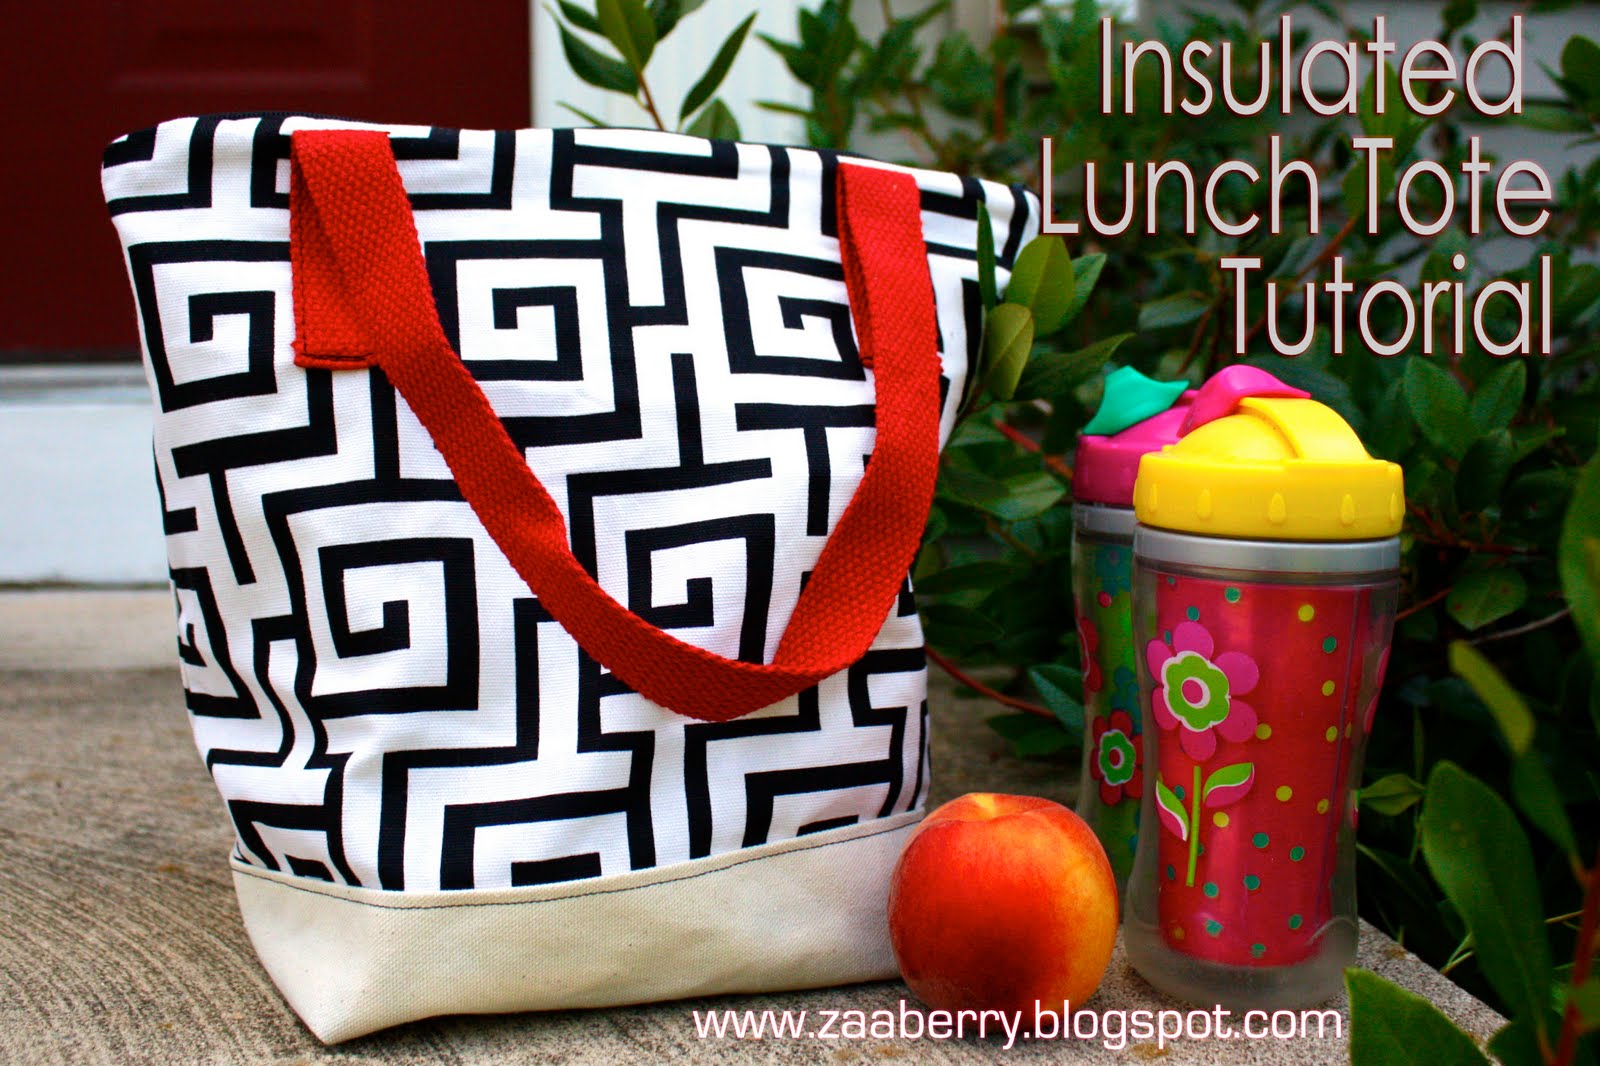 Insulated Lunch Tote Tutorial